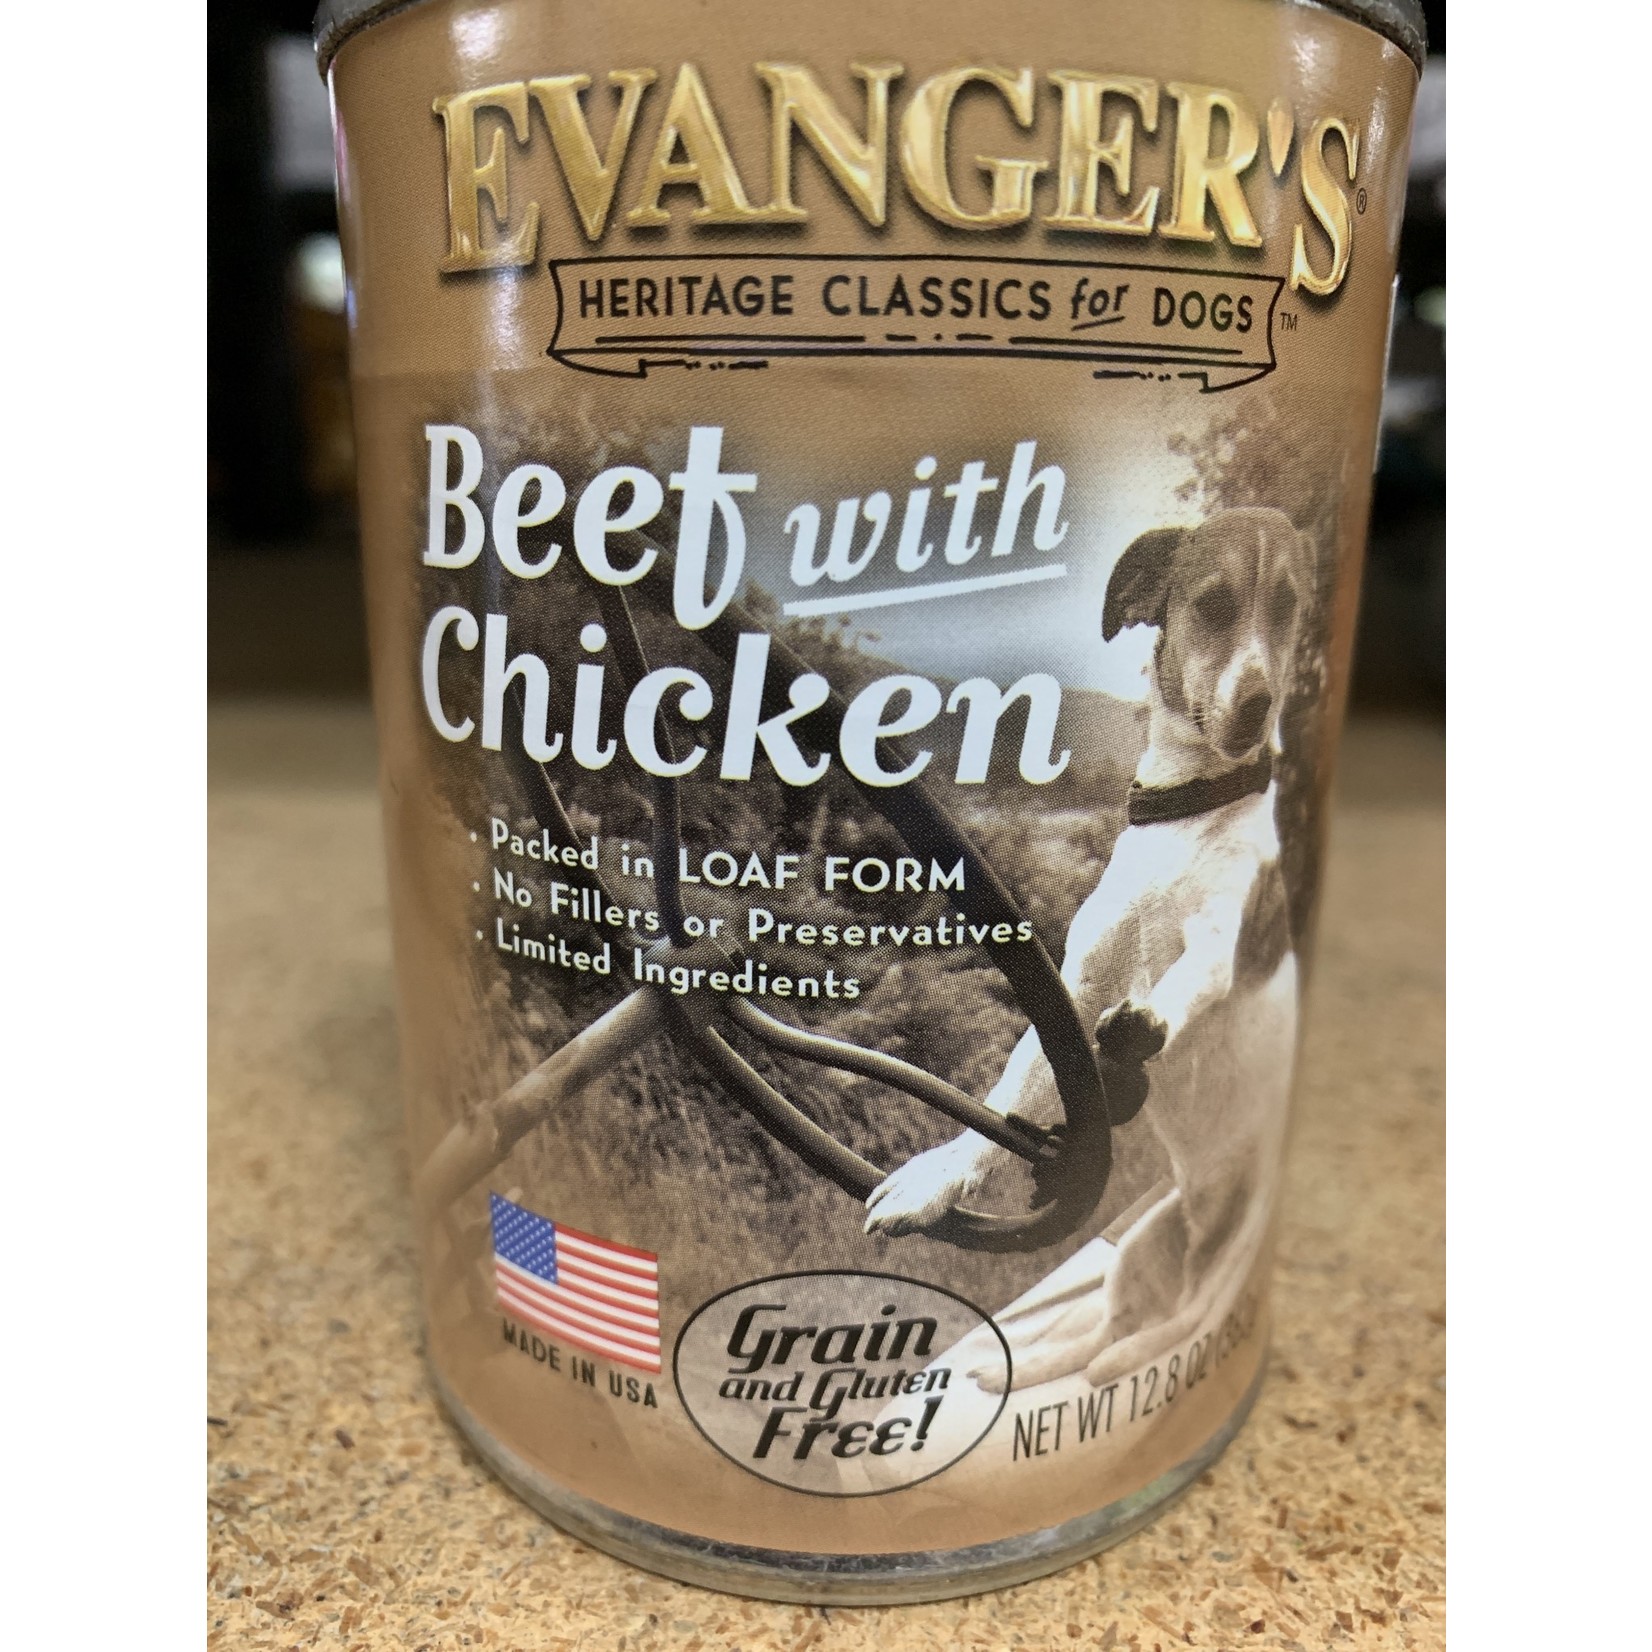 EVANGERS EVANGERS Canned Beef & chicken 13oz